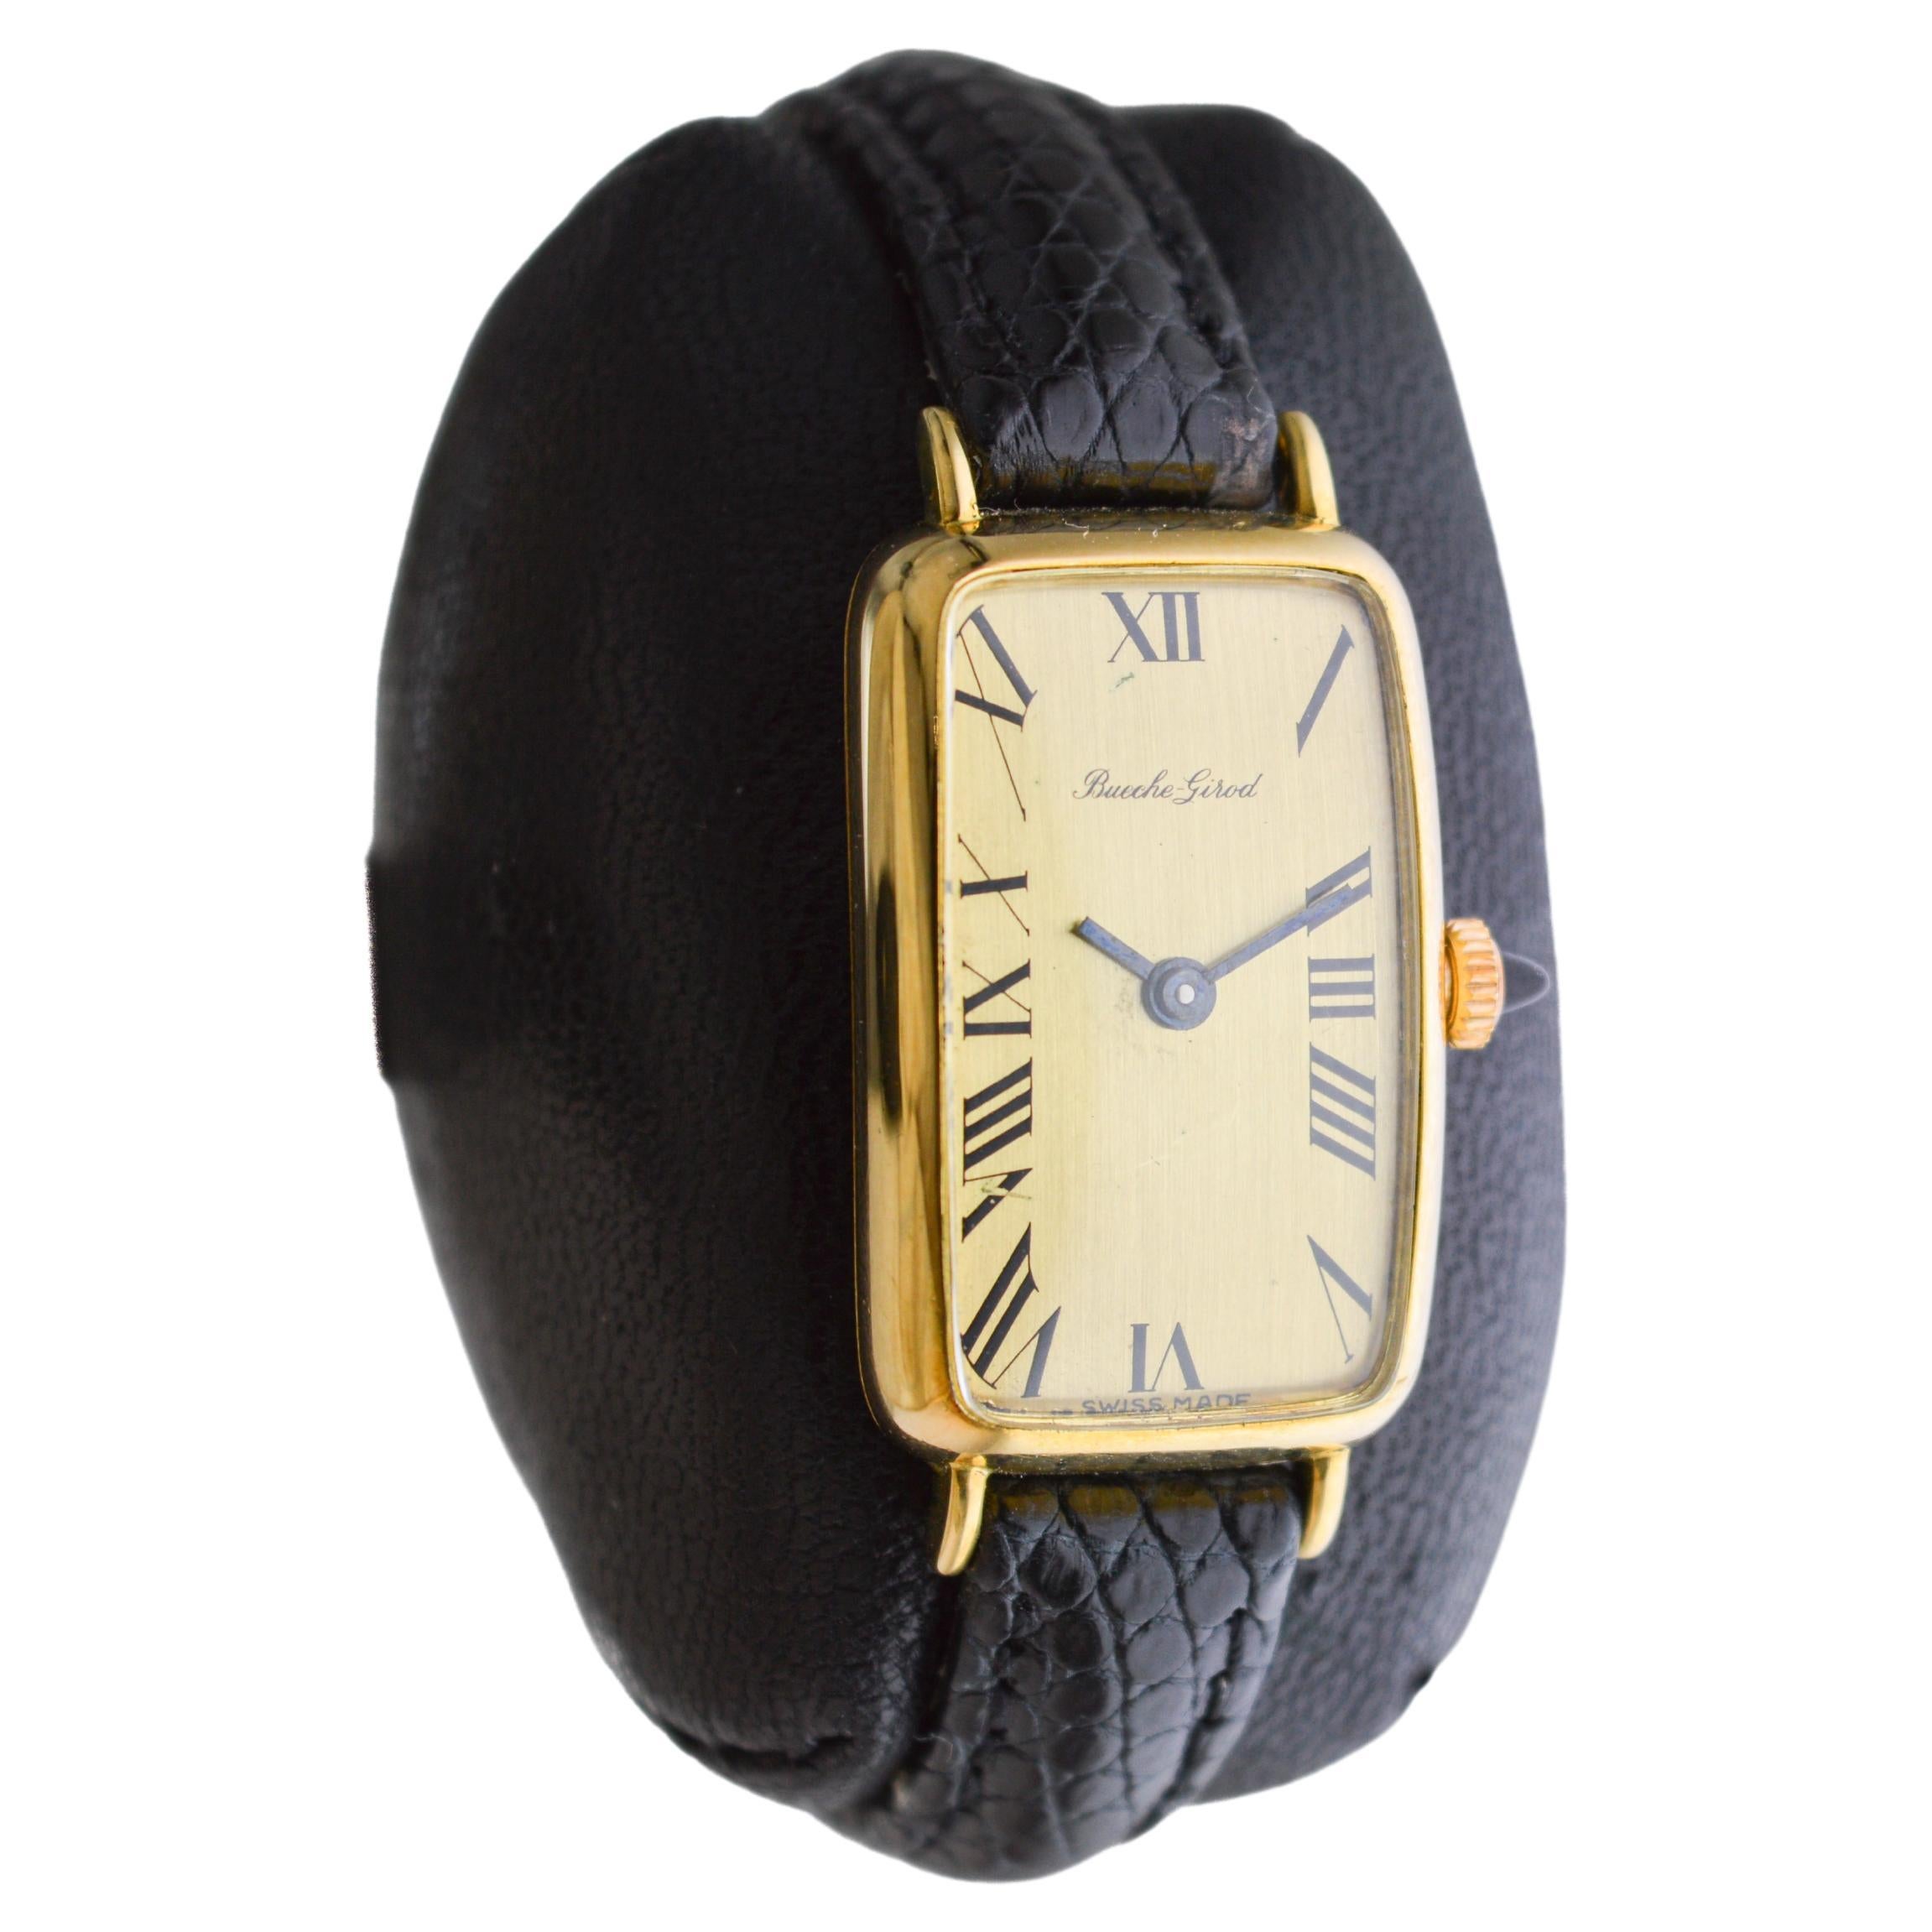 FACTORY / HOUSE: Bueche Girod Watch Company
STYLE / REFERENCE: Art Deco 
METAL / MATERIAL: 18kt Yellow Gold 
CIRCA / YEAR: 1960's 
DIMENSIONS / SIZE: Length 35mm x Width 18mm
MOVEMENT / CALIBER: Manual Winding / 17 Jewels / Caliber 59
DIAL / HANDS: